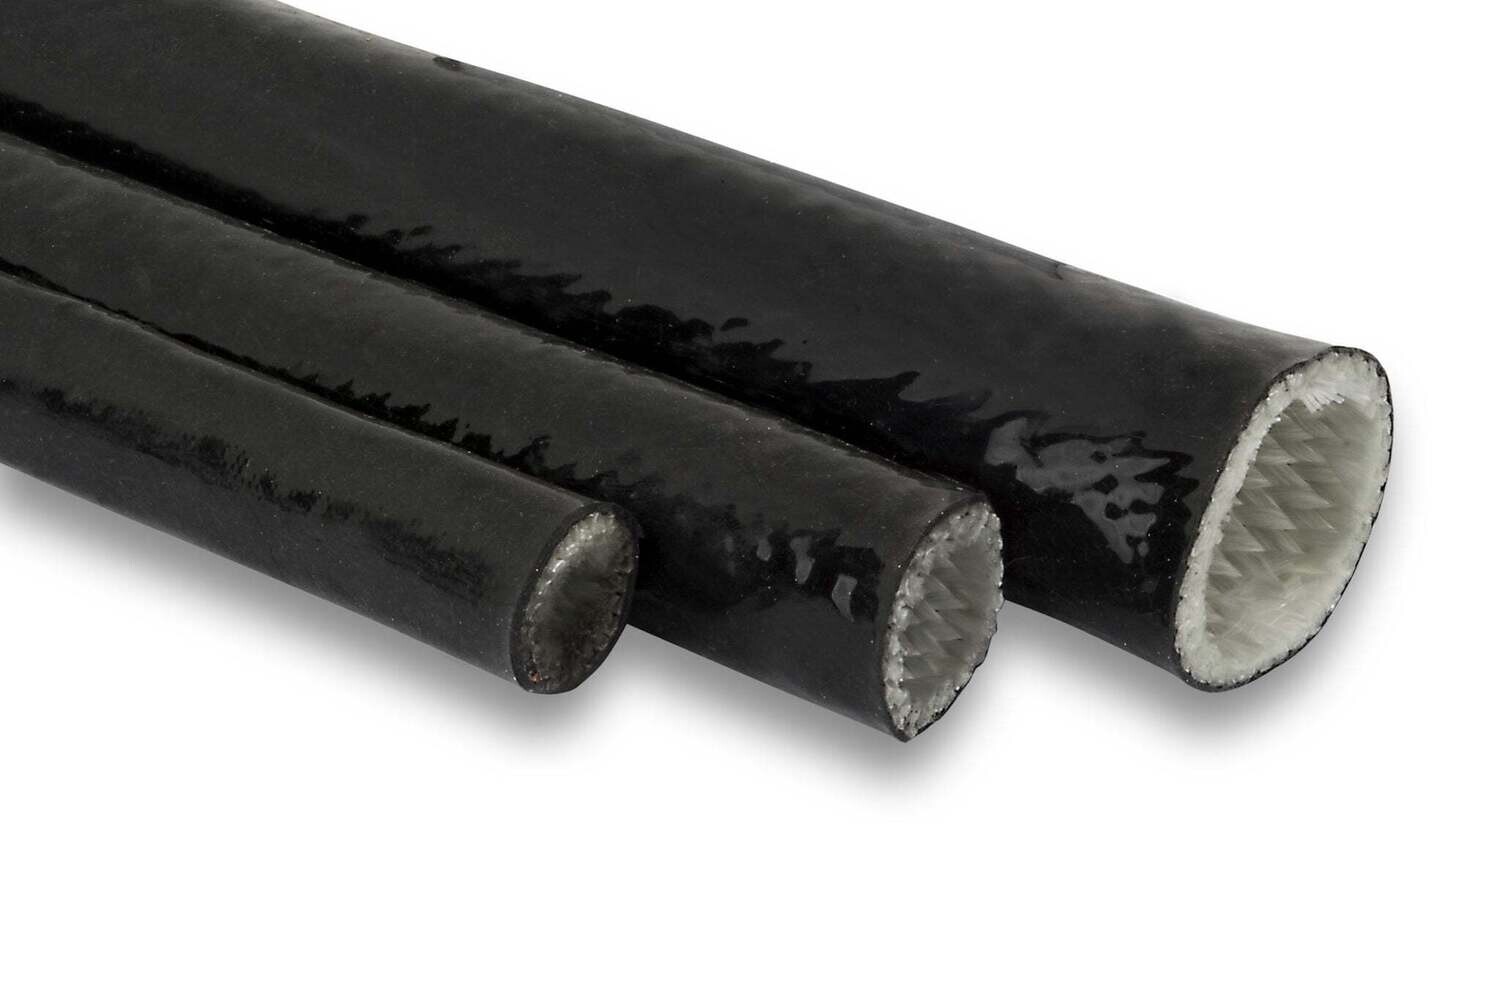 Black Silicon High Heat Sleeve - 25mm, 5.0m Multiple Qty will come on a continuous Roll